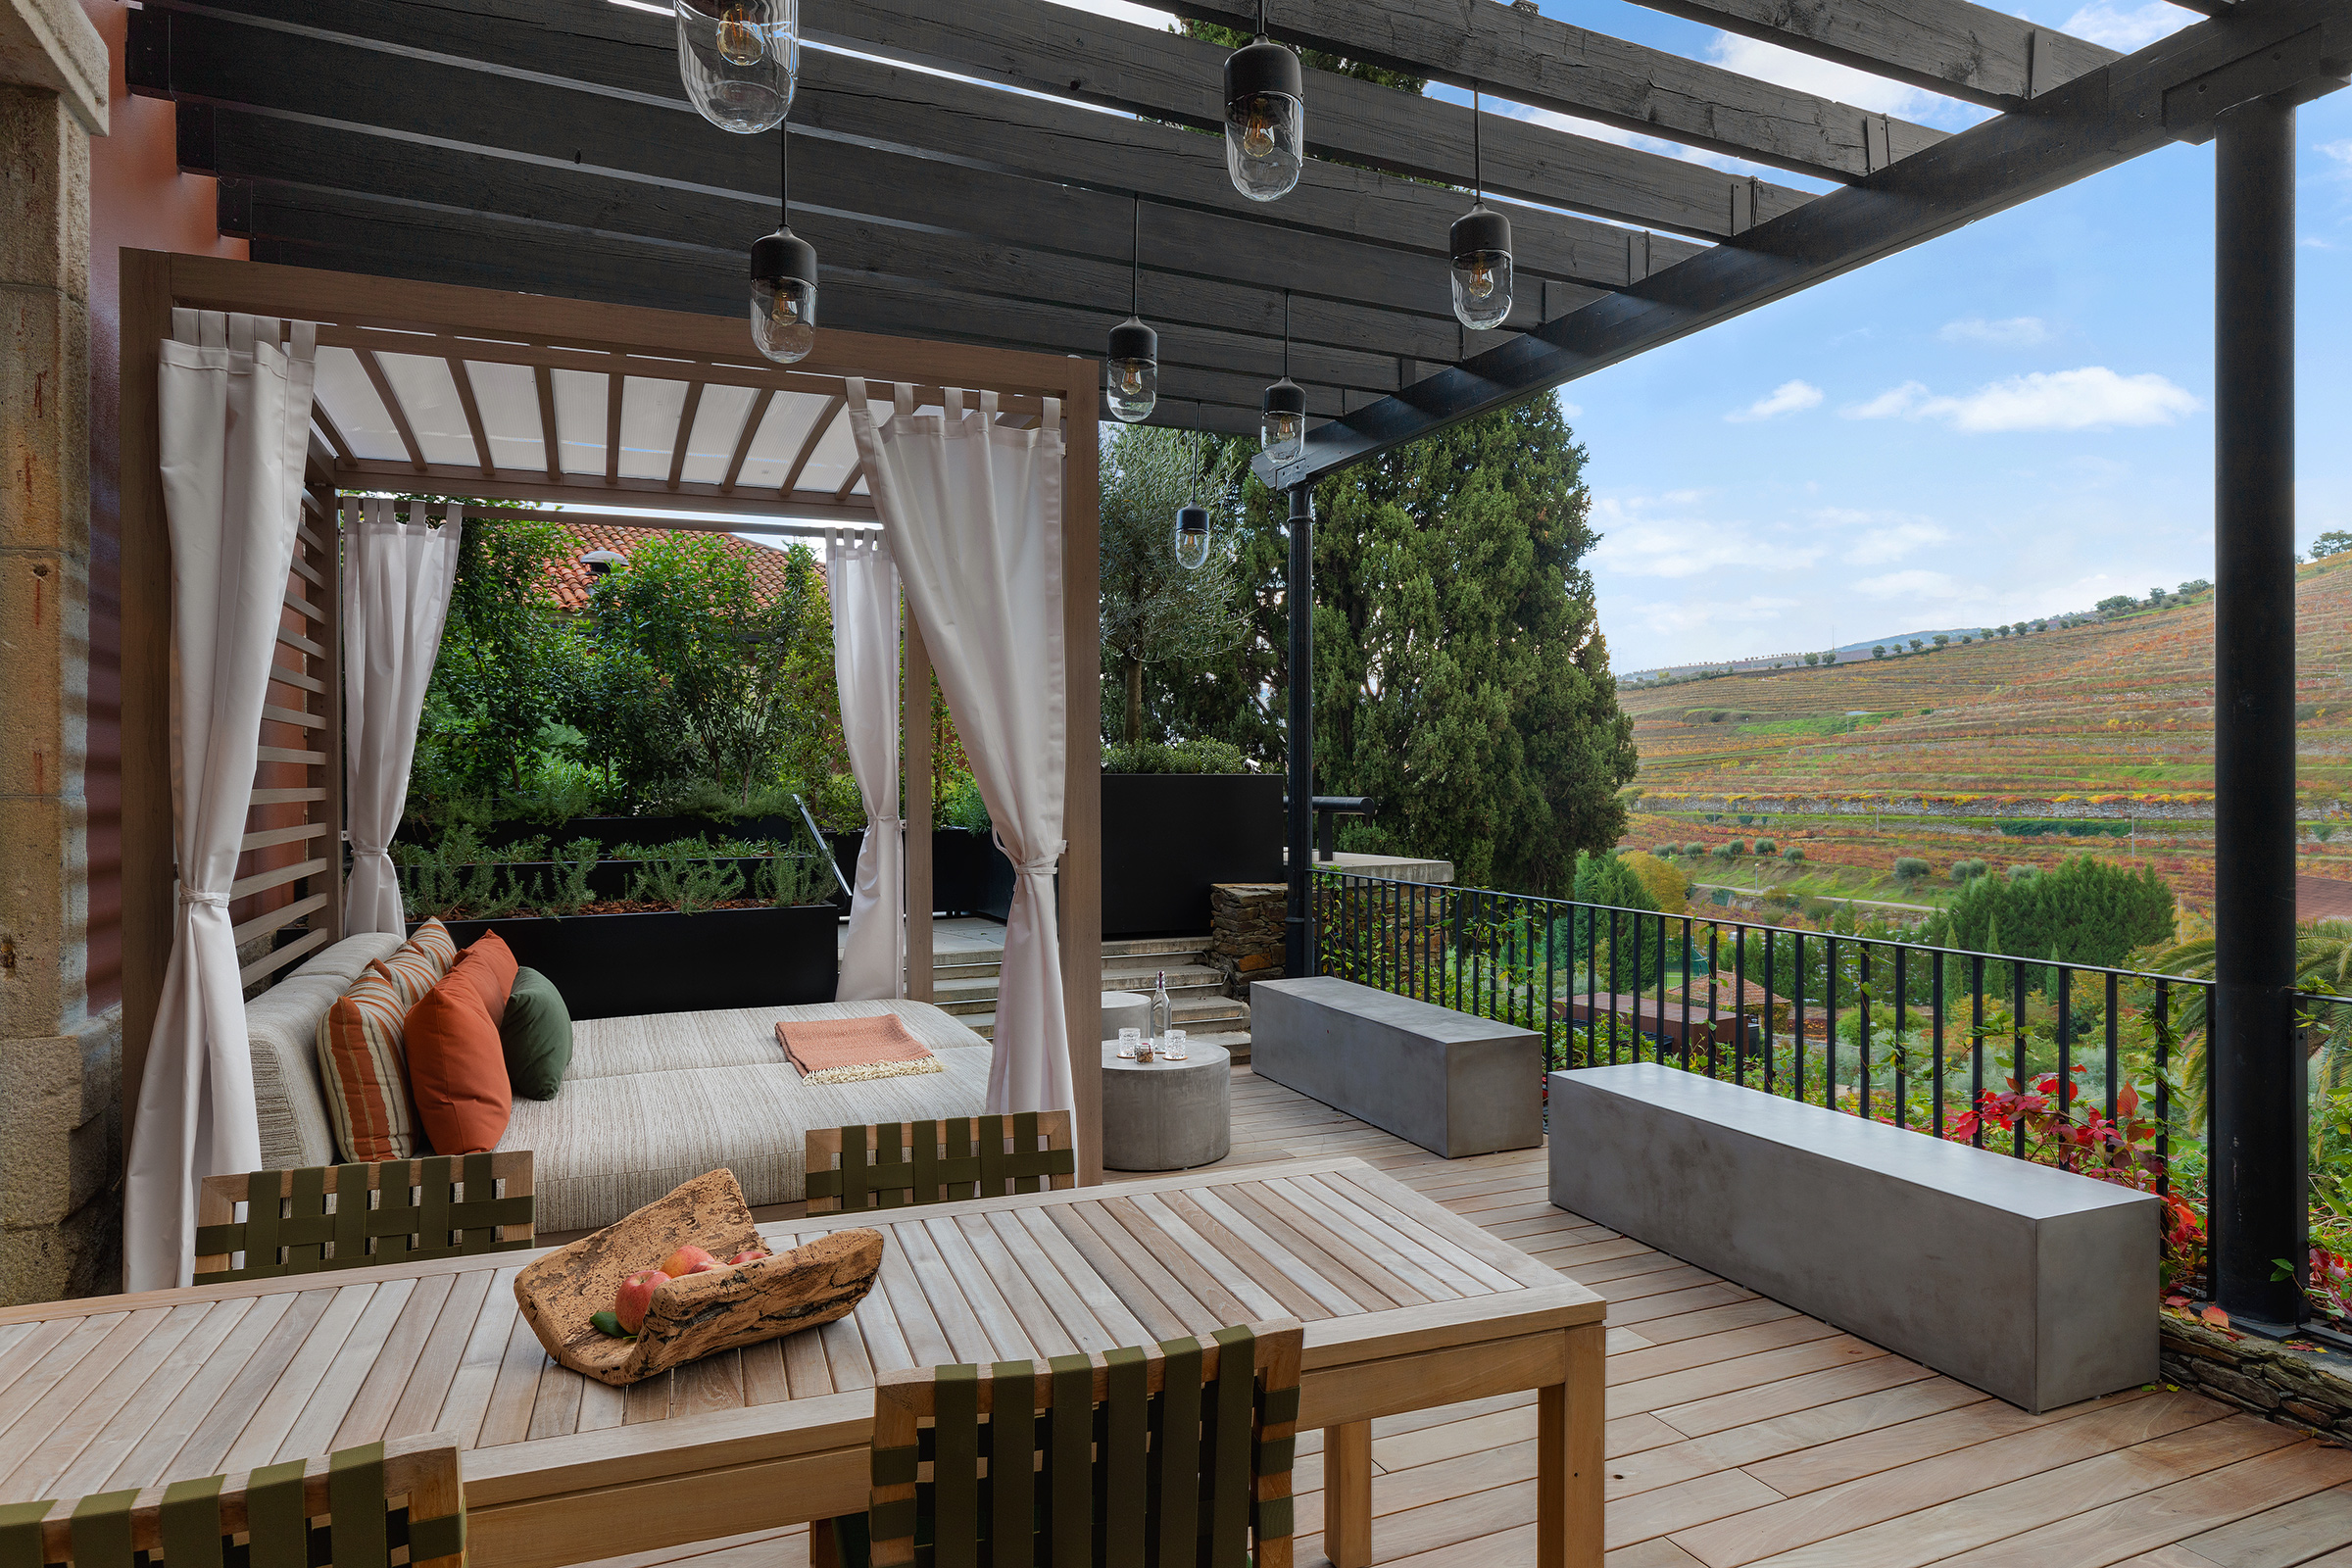 An outdoor resting spot at the Six Senses Douro Valley in Portugal (Courtesy Six Senses Douro Valley)